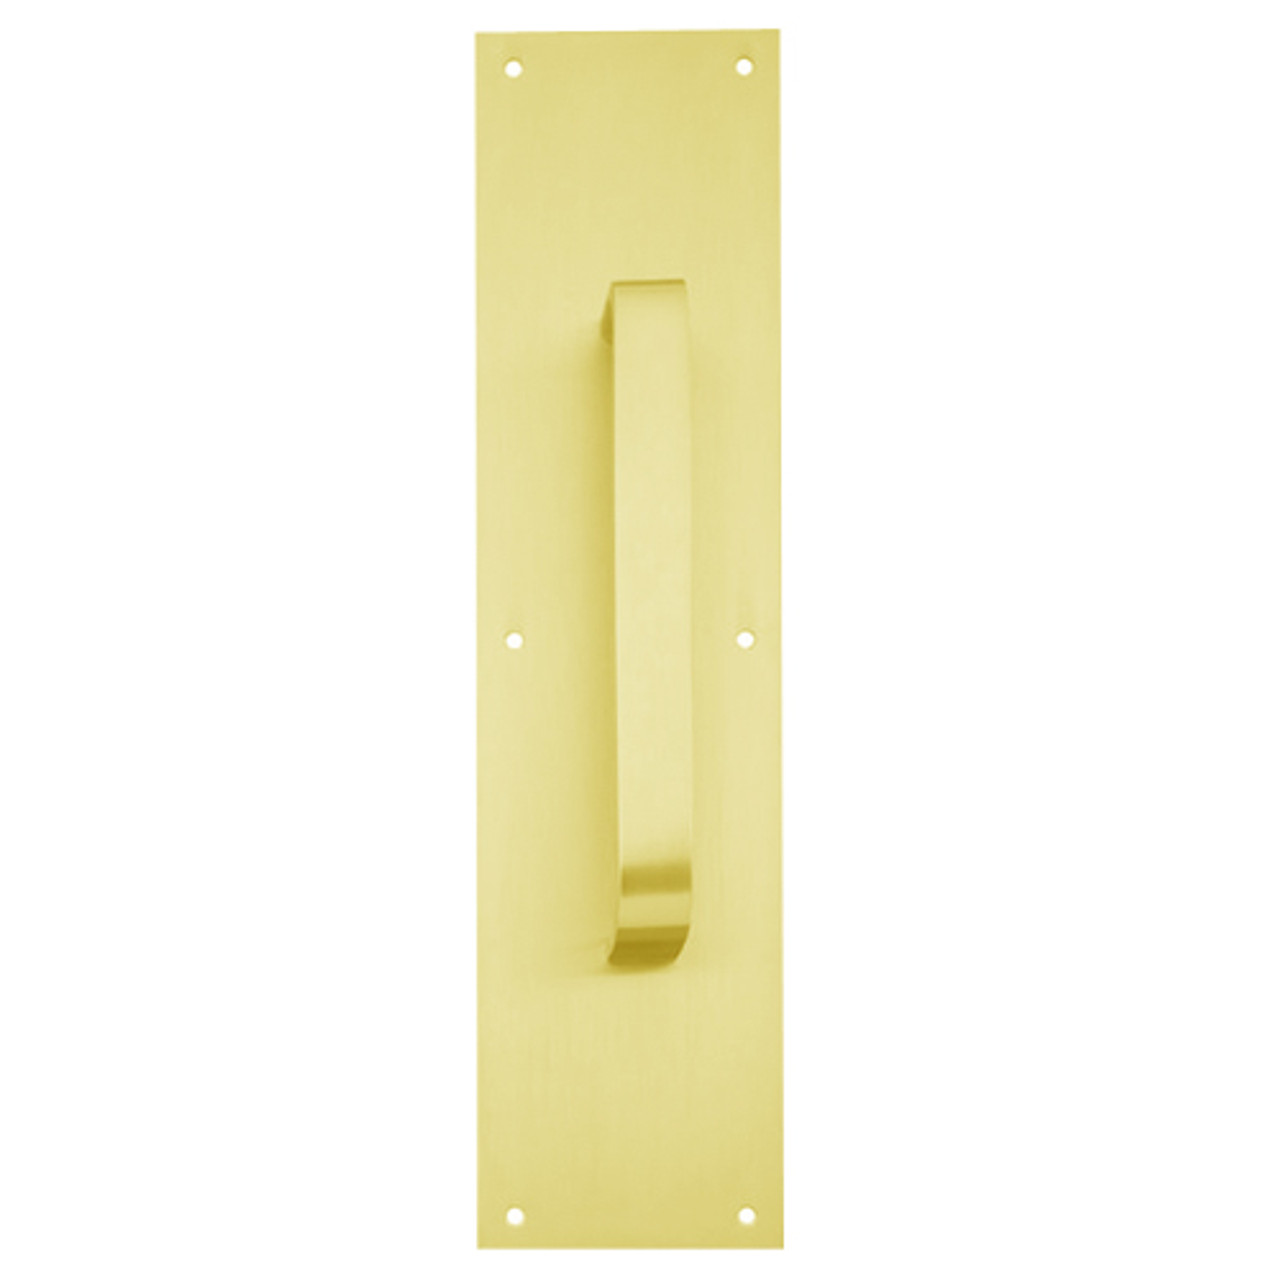 8305-6-US3-6x16 IVES Architectural Door Trim 6x16 Inch Pull Plate in Bright Brass